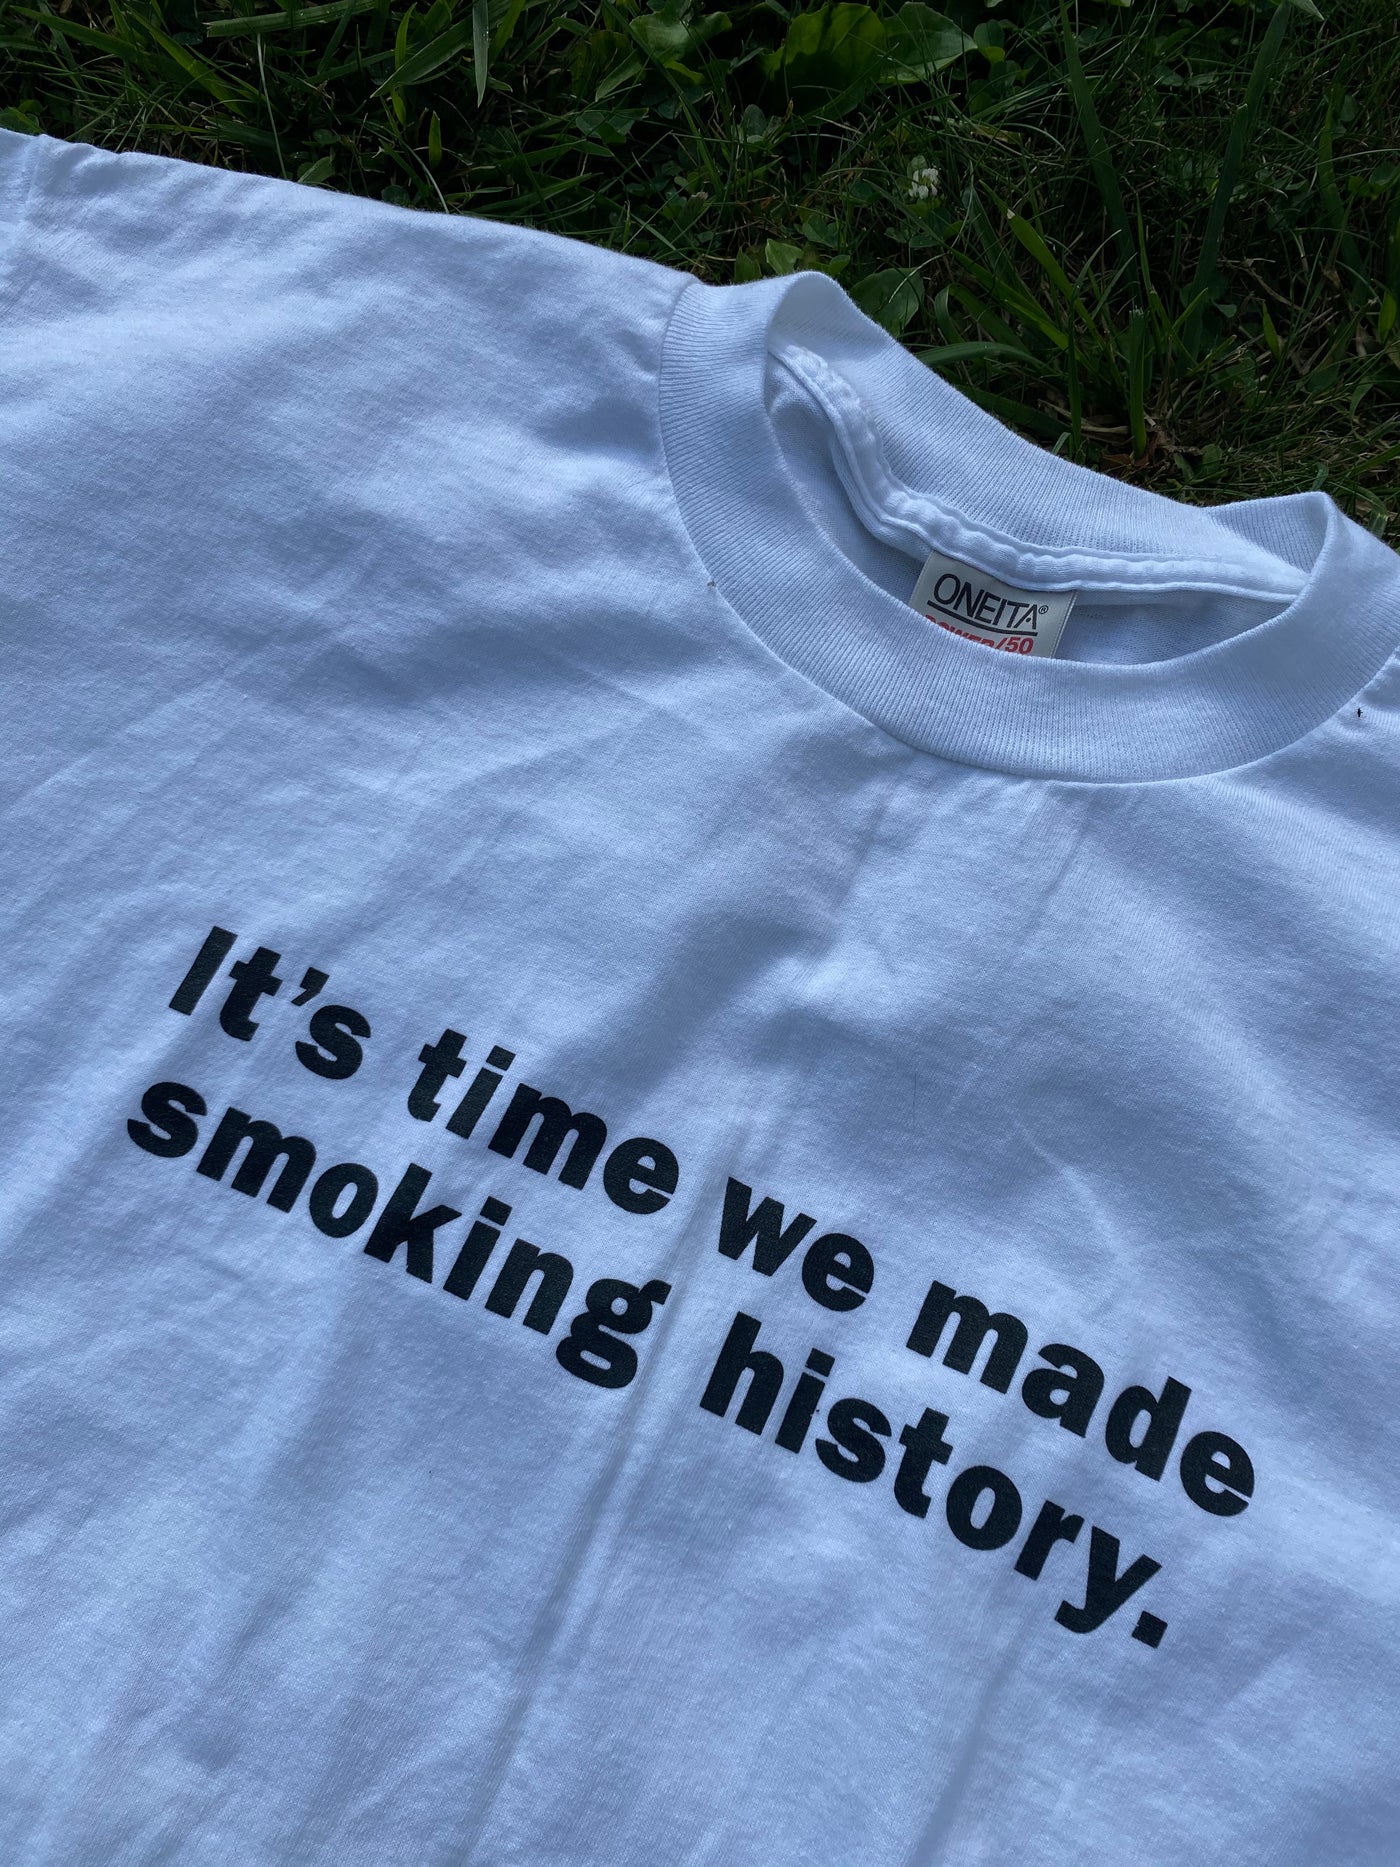 Vintage 90's "It's Time We Made Smoking History" T-Shirt